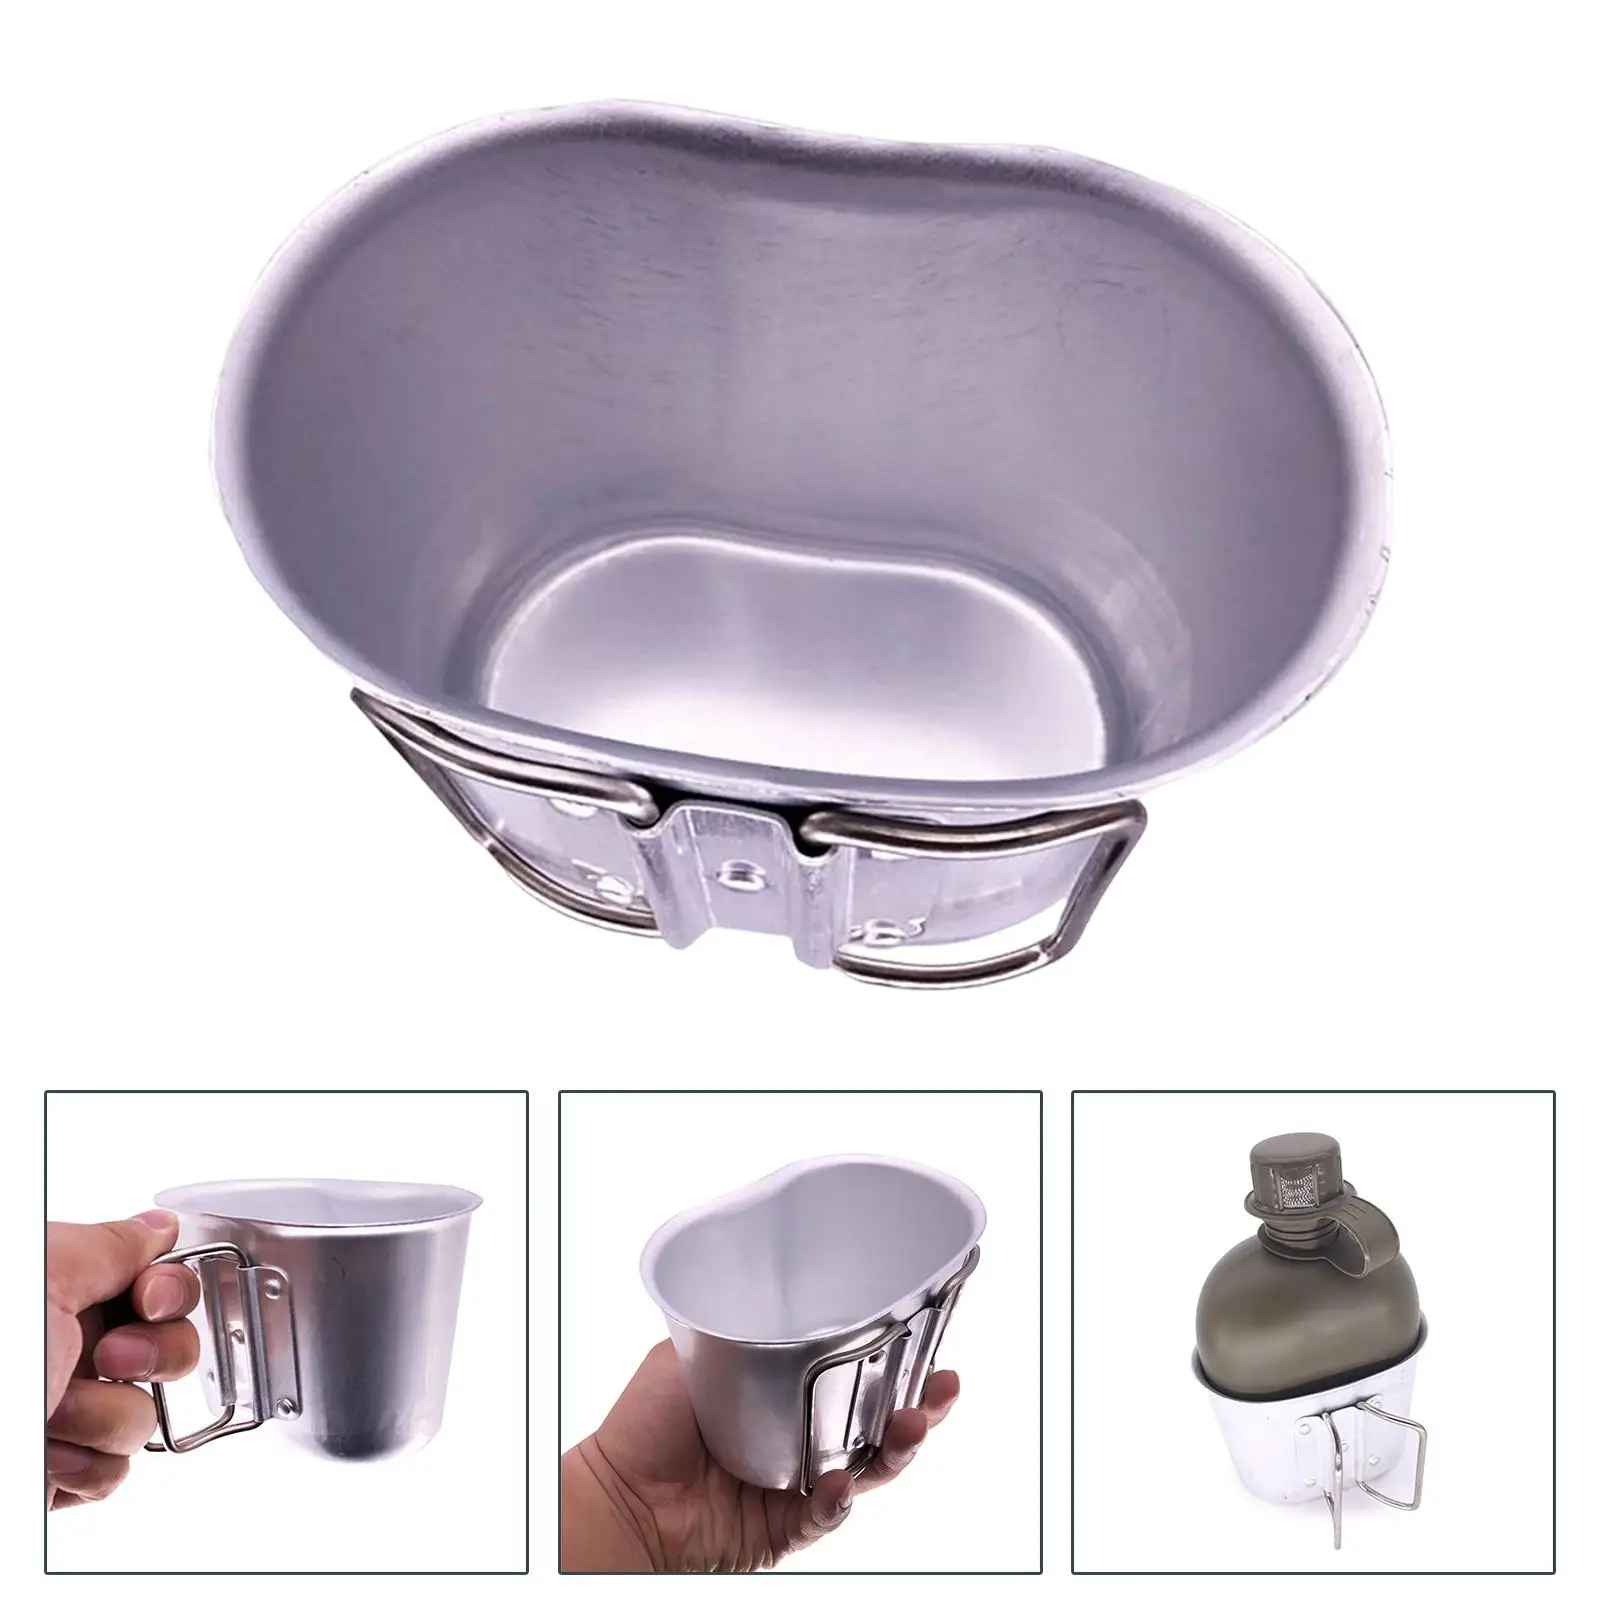 Multifunctional Camping Cookware Cup Lunchbox Foldable Handle Beer Mug Container 600ml Alloy for Hiking Outdoor Picnic Travel